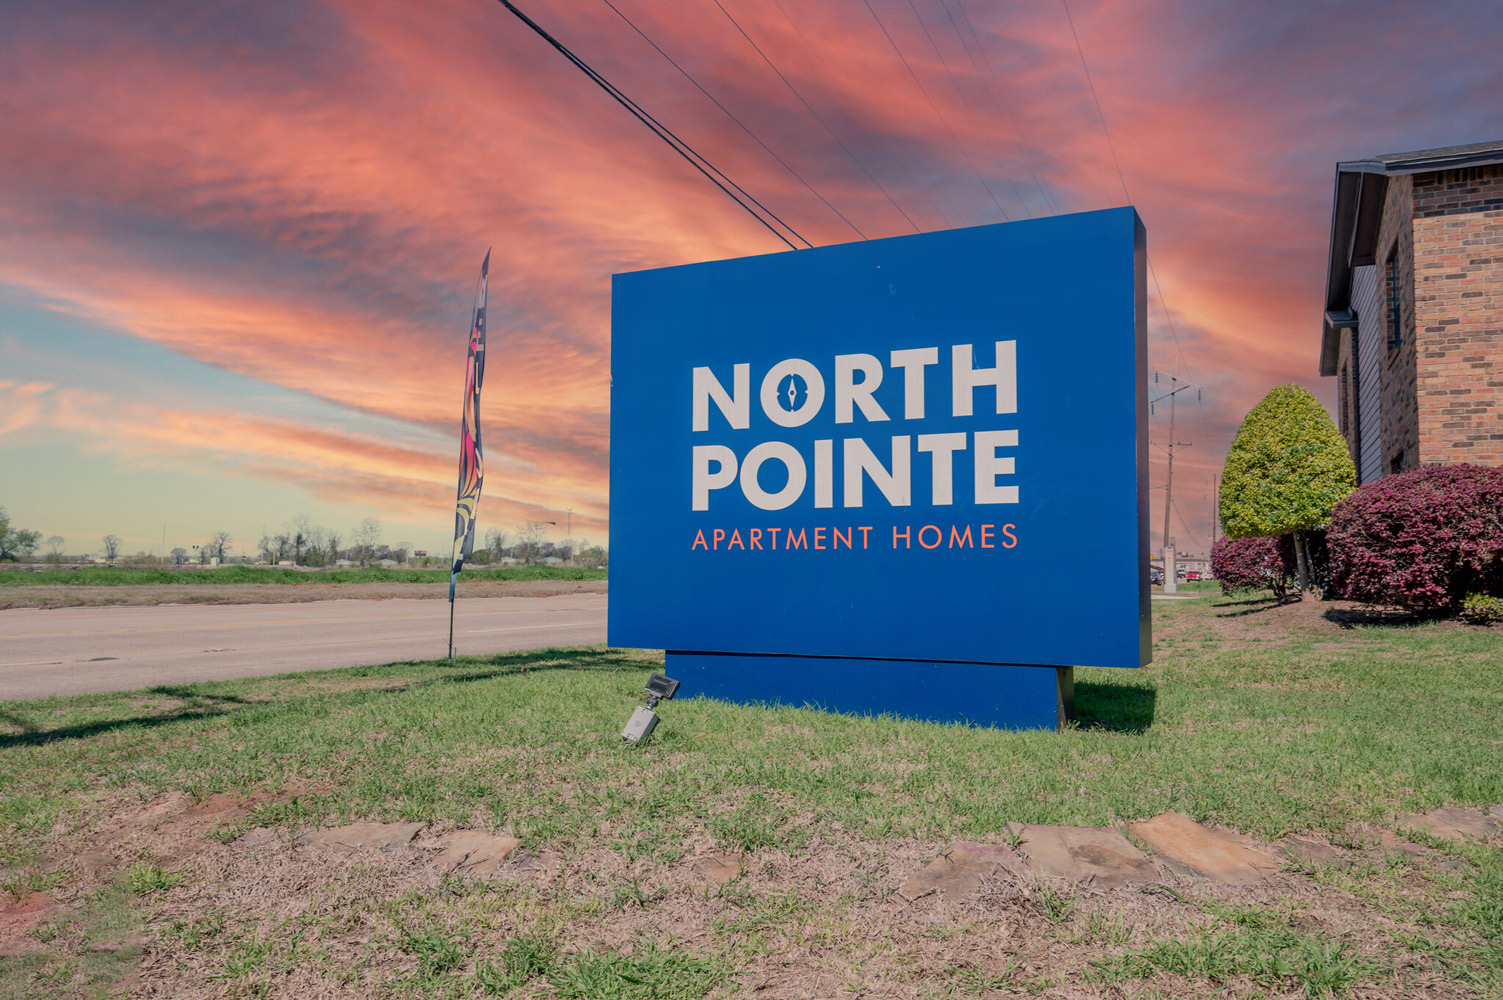 Signage at North Pointe Apartments